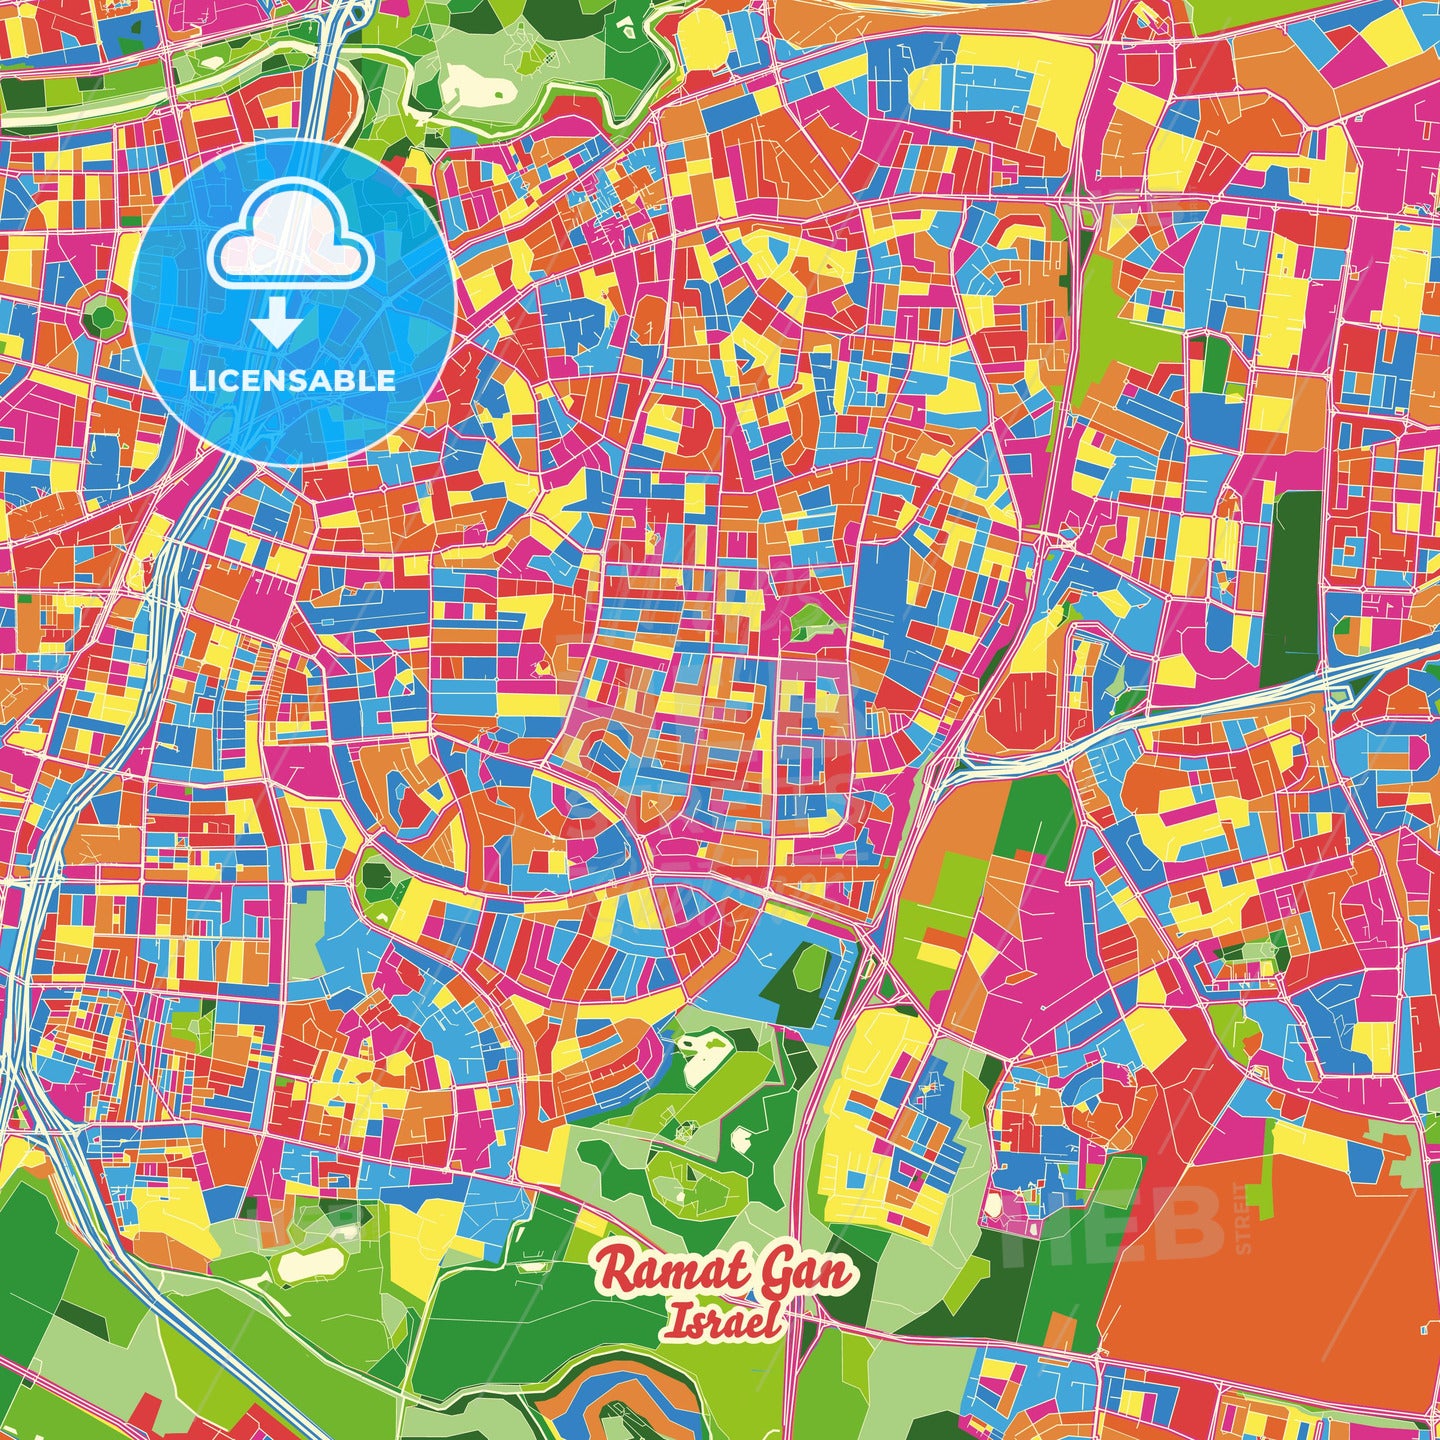 Ramat Gan, Israel Crazy Colorful Street Map Poster Template - HEBSTREITS Sketches